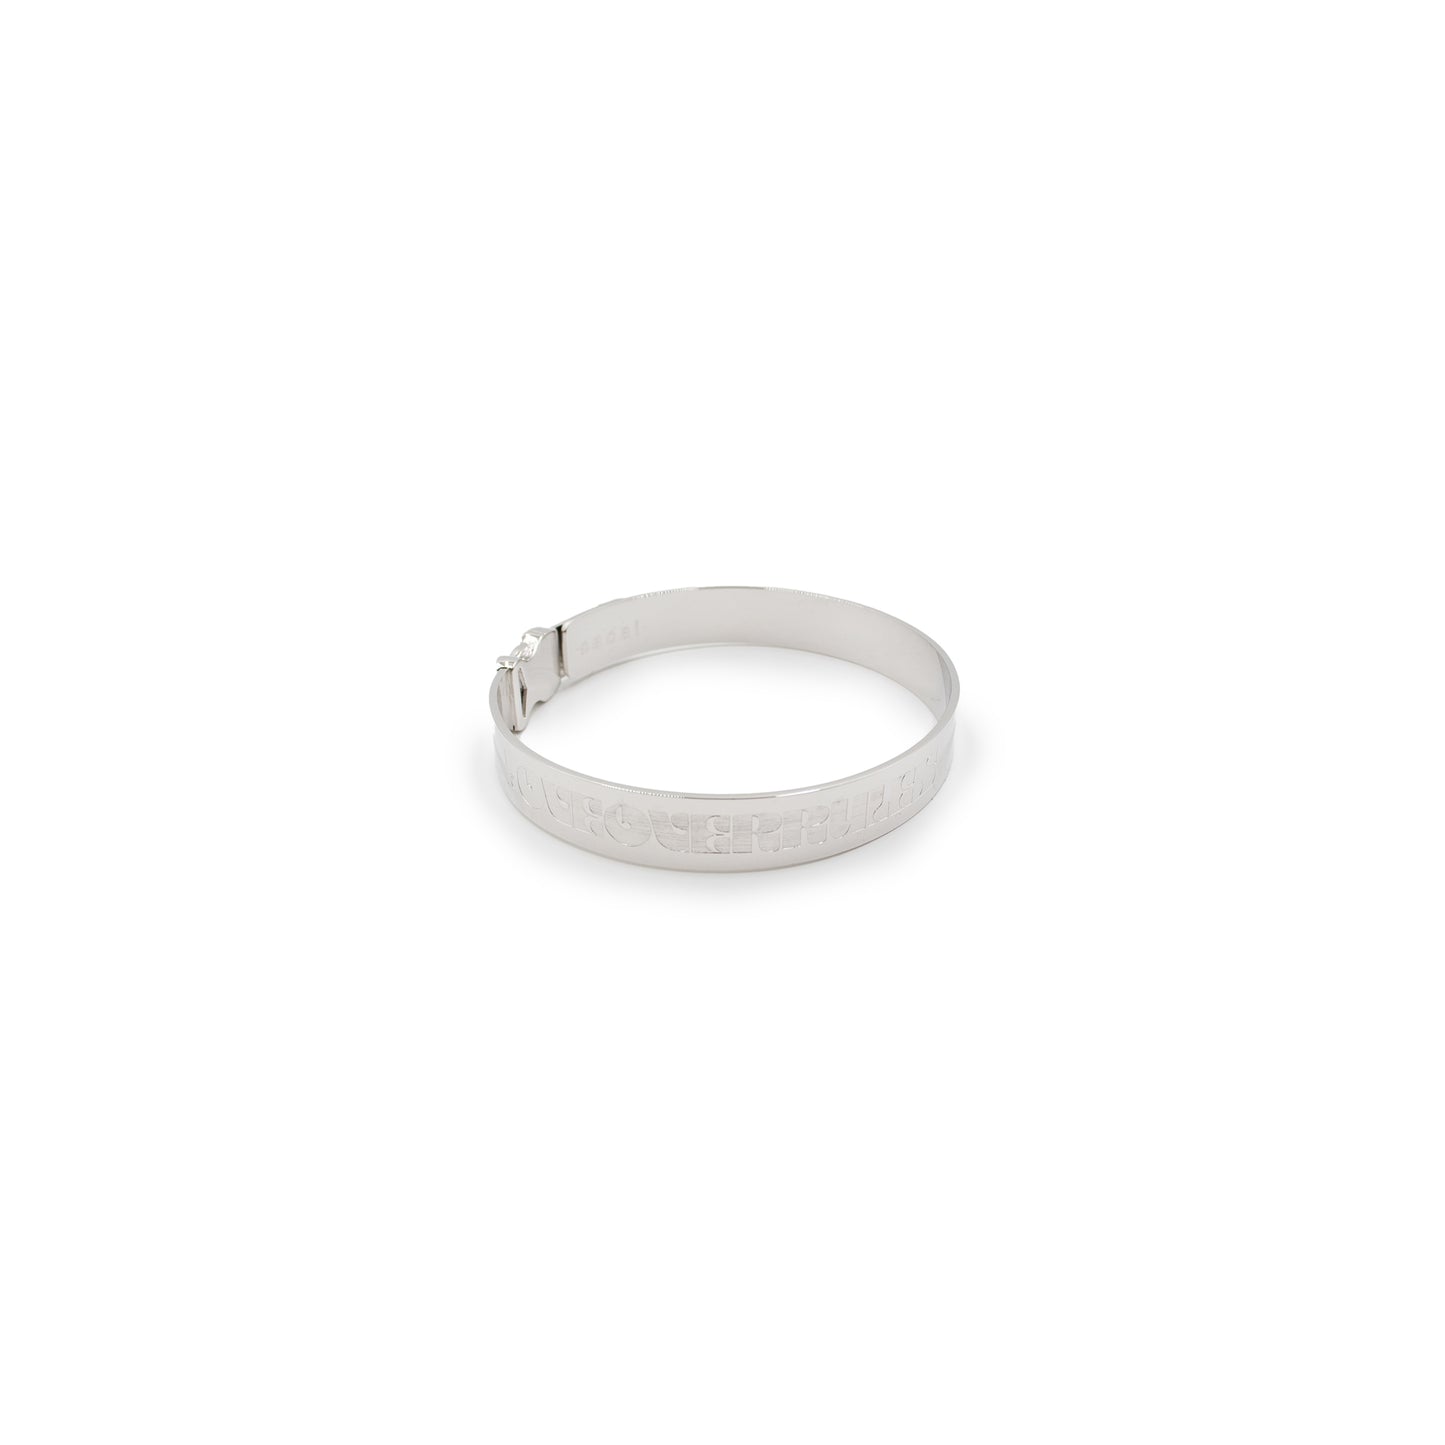 Buckle Bangle in Silver